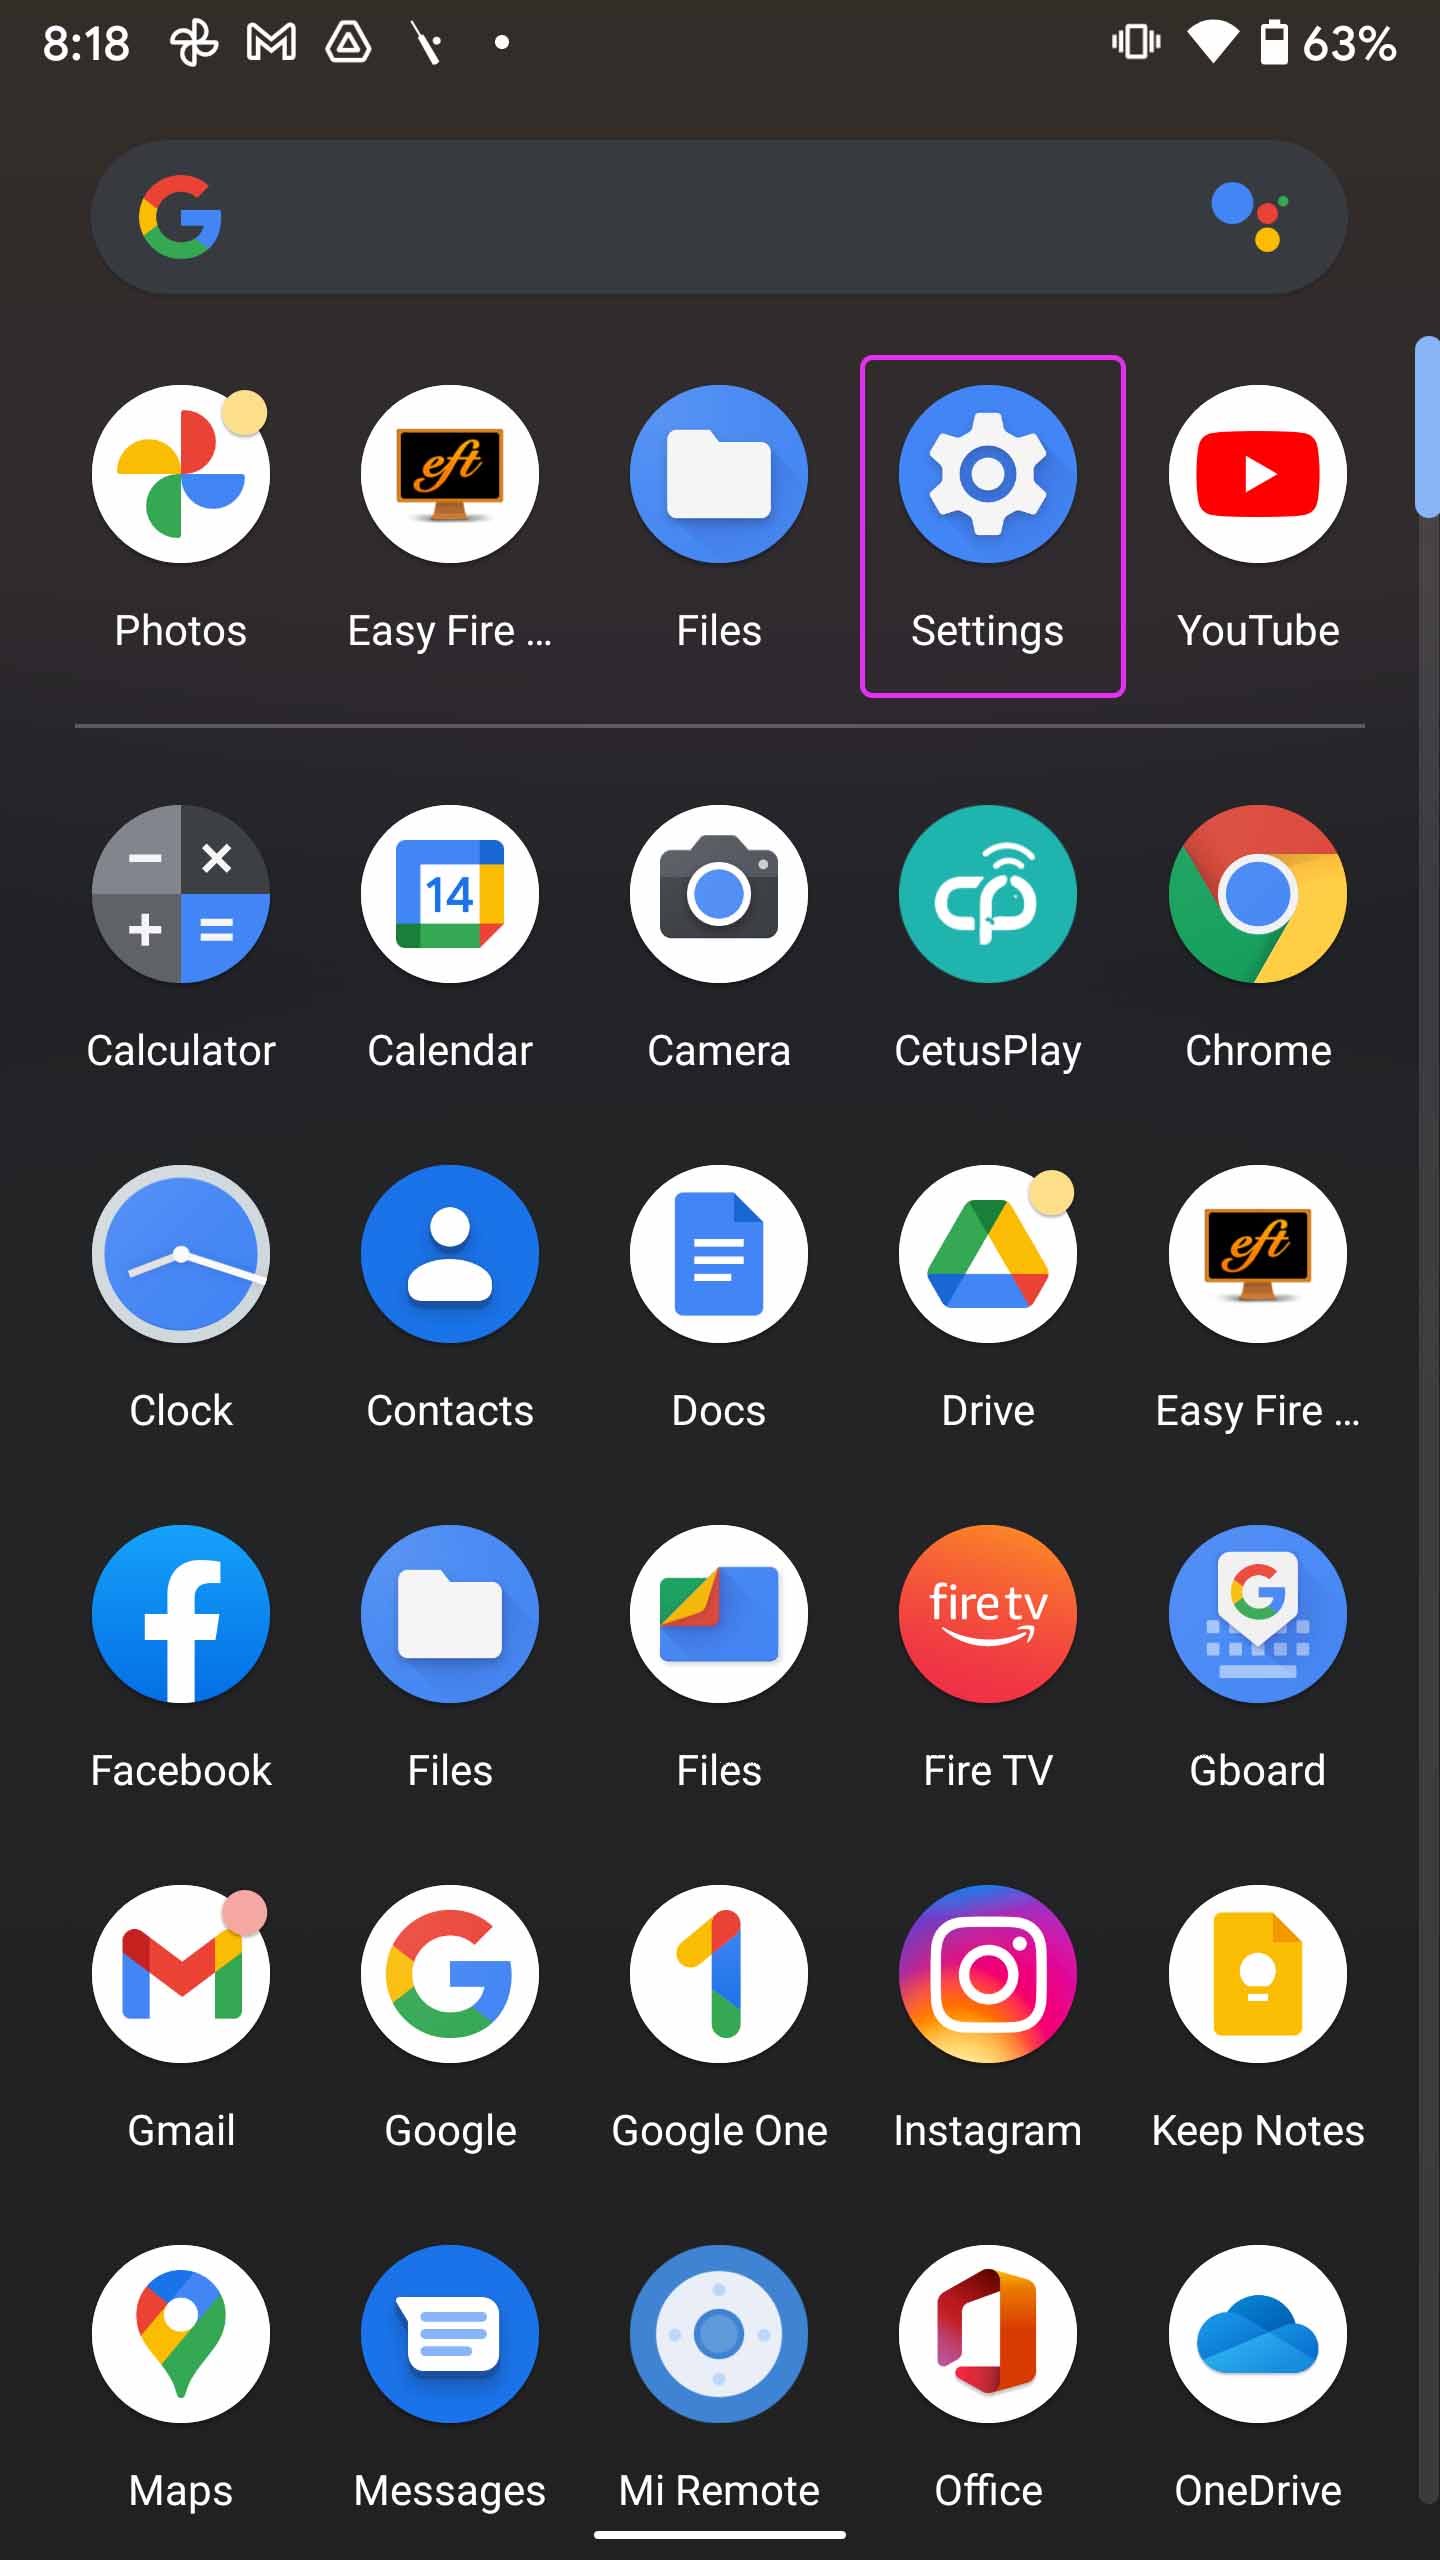 PlayScore2 needs hi-end camera – Apps on Google Play